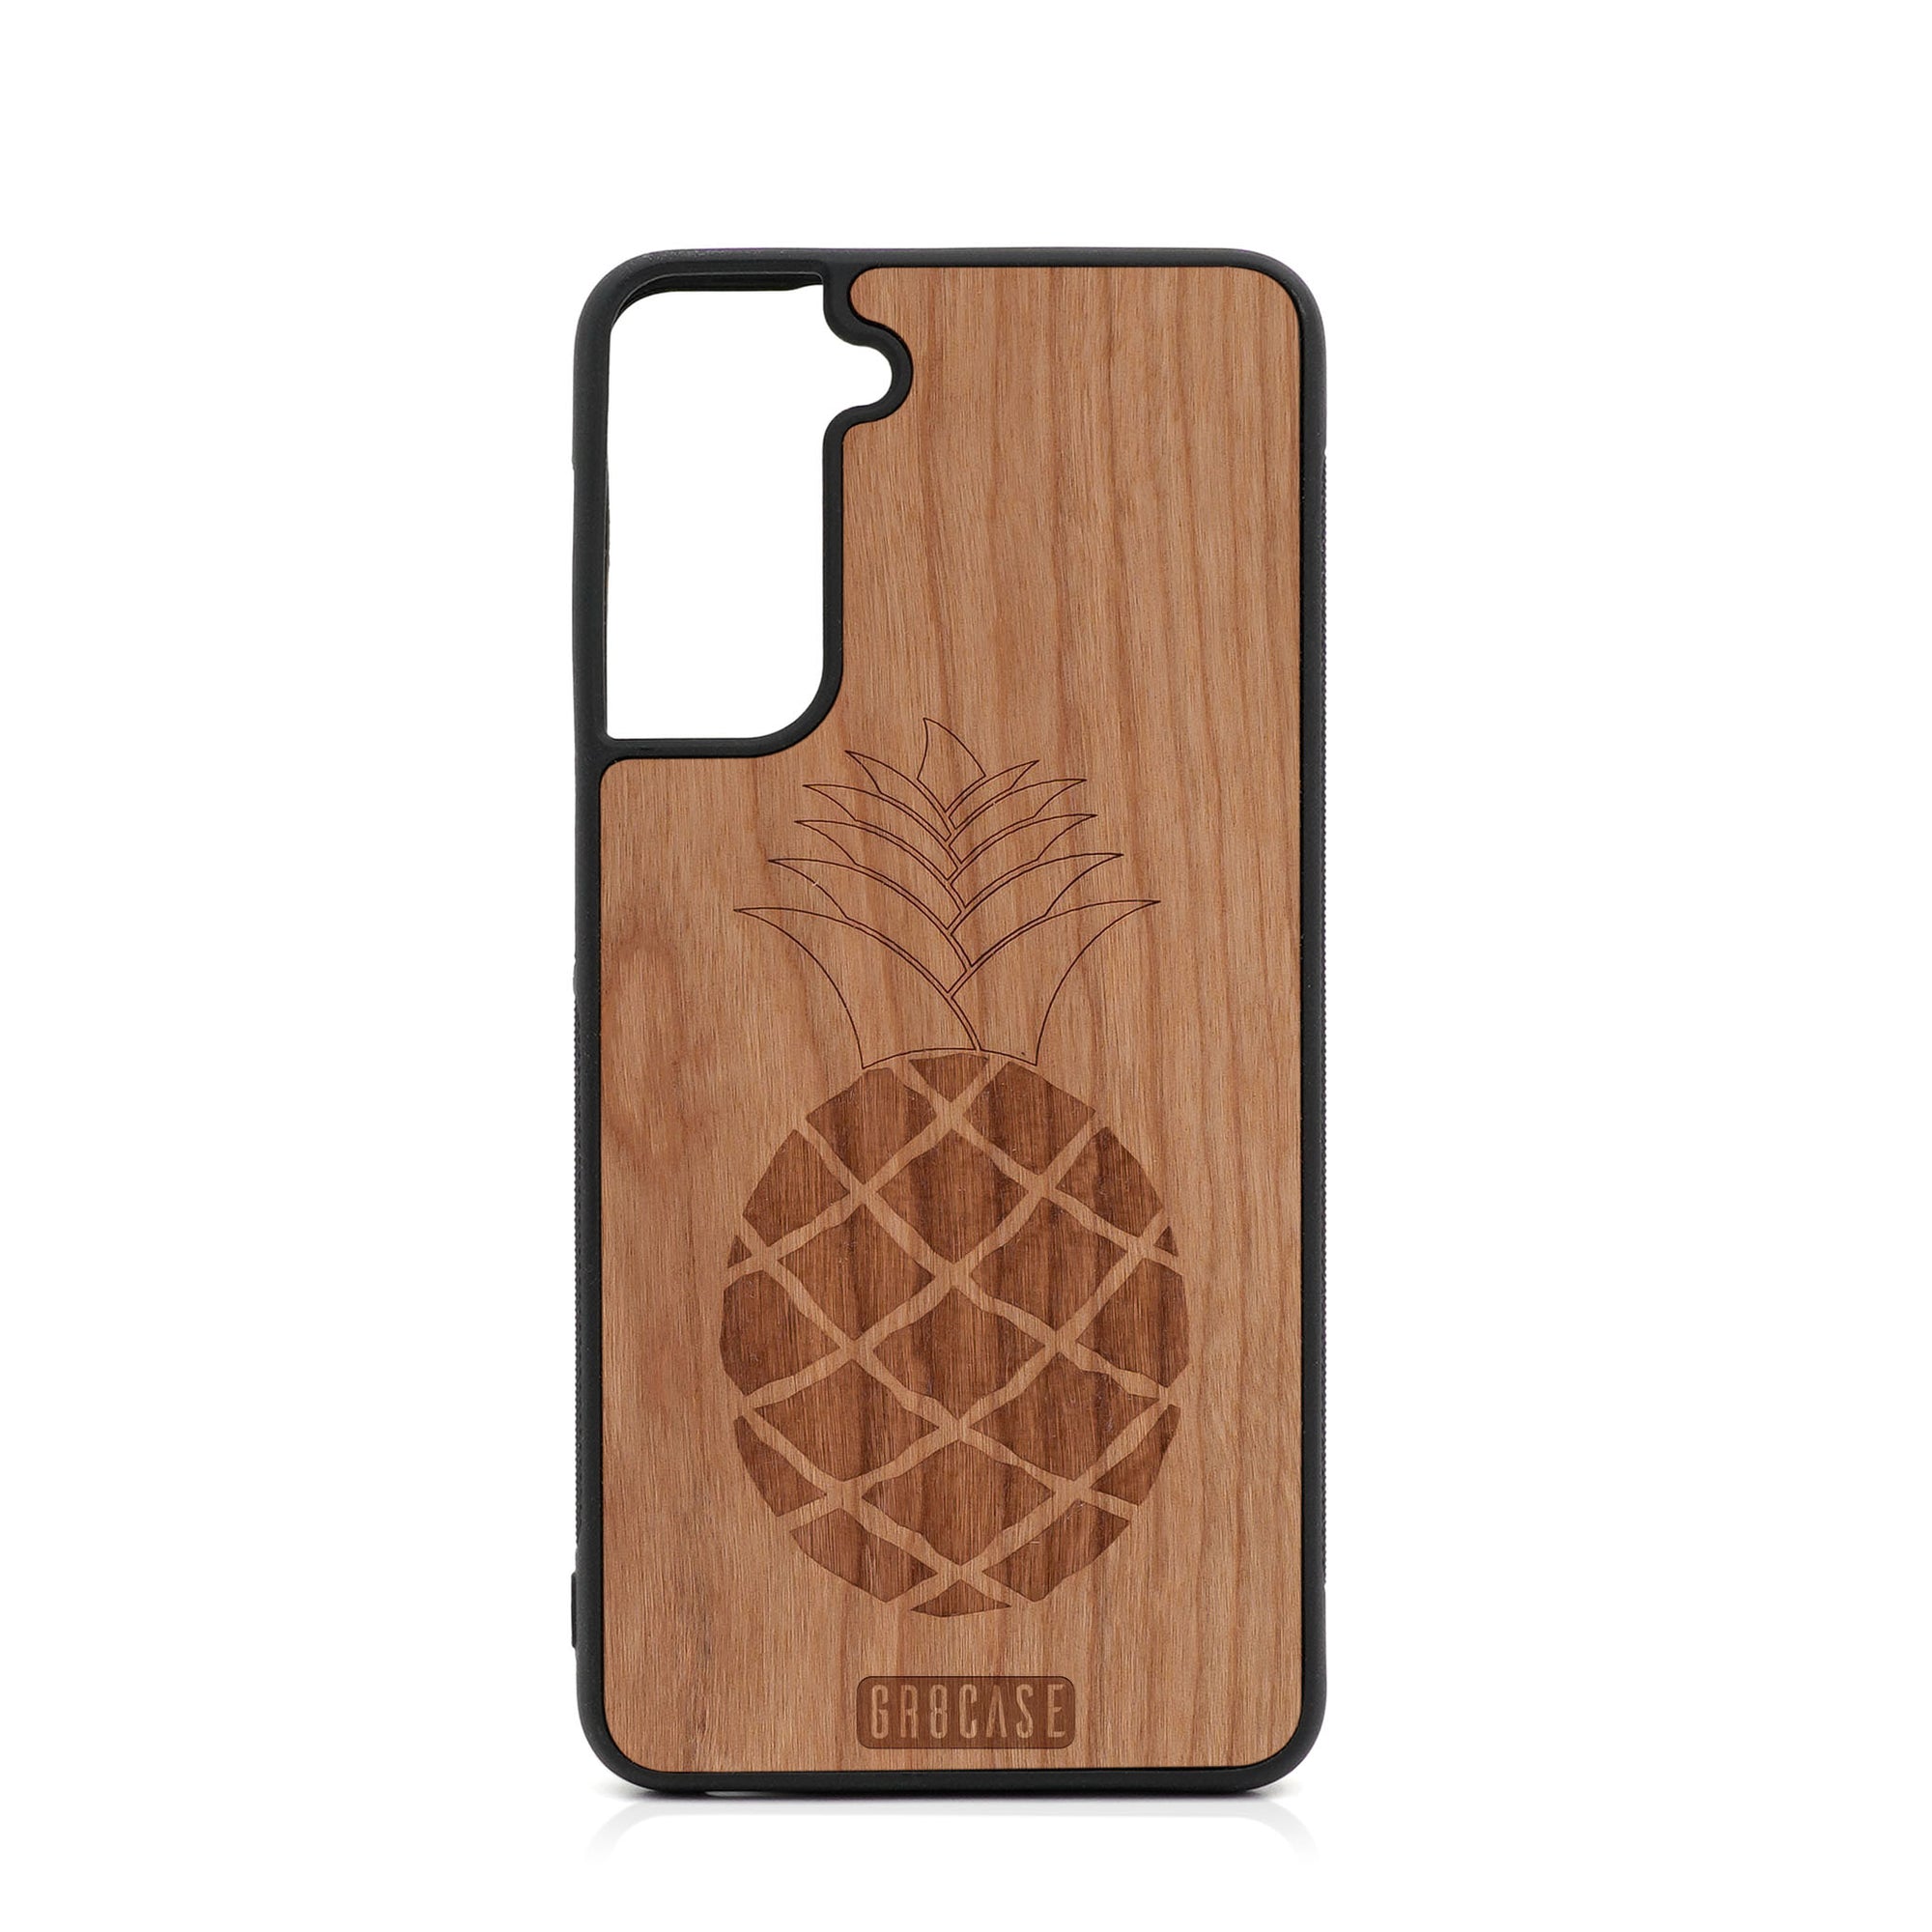 Pineapple Design Wood Case For Samsung Galaxy S21 Plus 5G